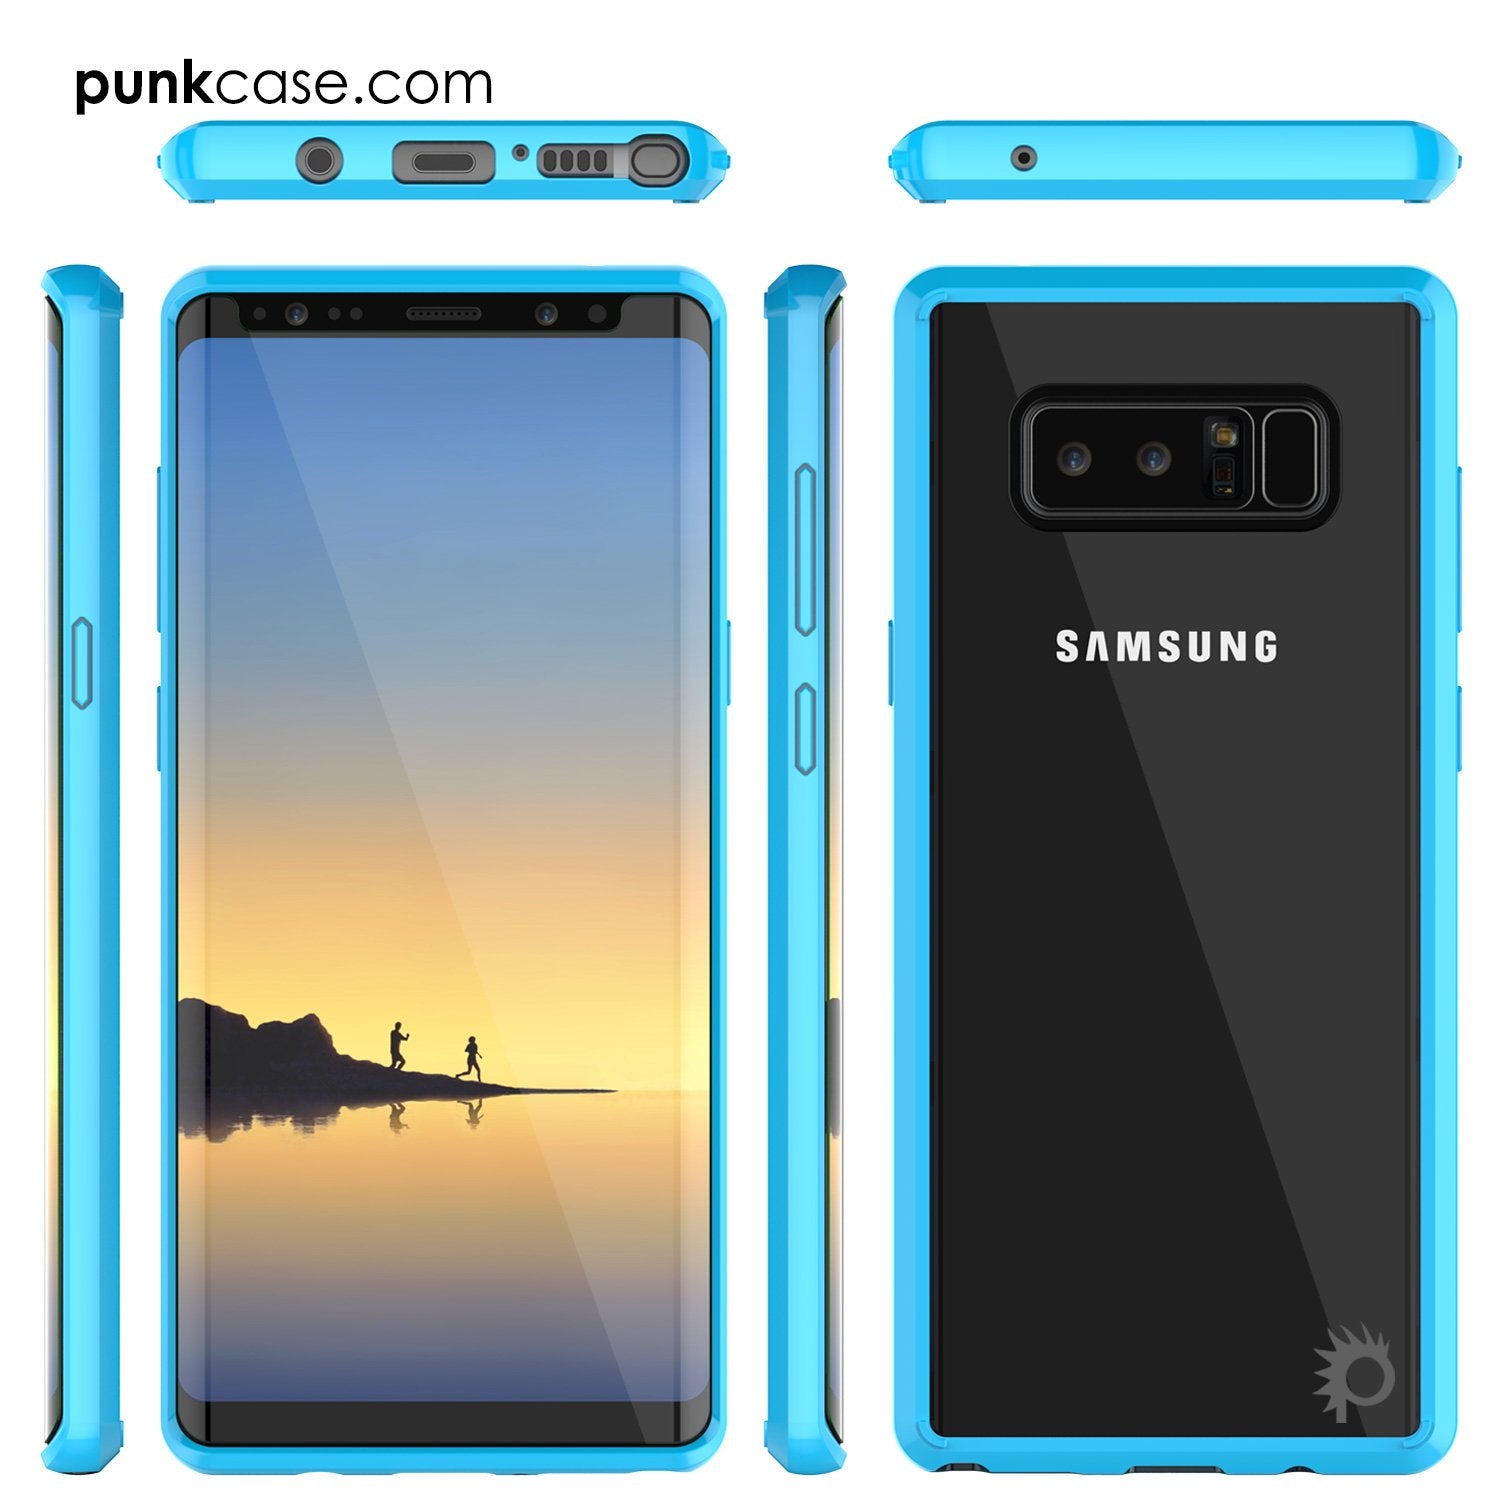 Galaxy Note 8 Case, PUNKcase [LUCID 2.0 Series] [Slim Fit] Armor Cover w/Integrated Anti-Shock System & PUNKSHIELD Screen Protector [Light Blue]